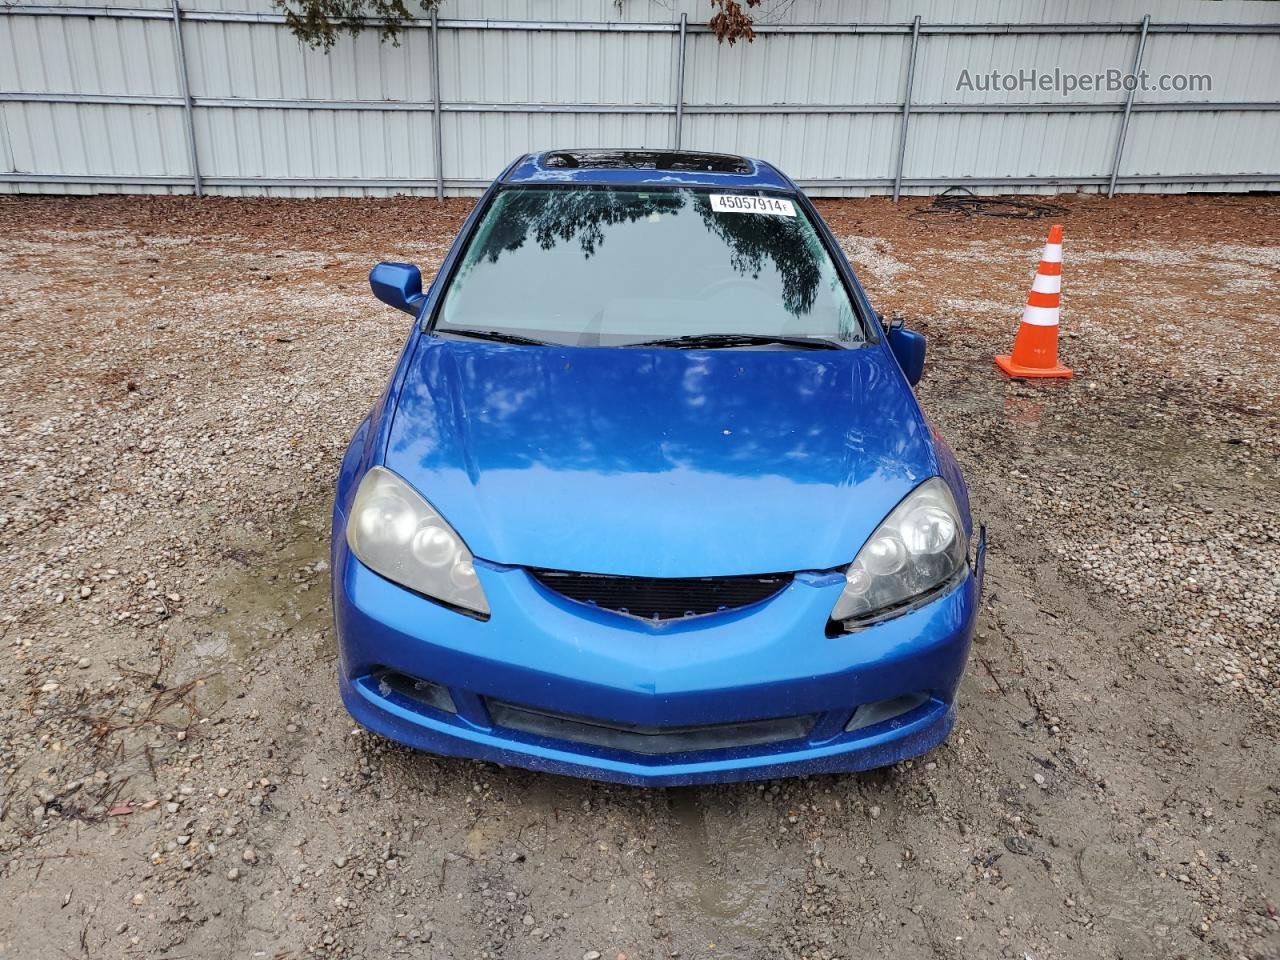 2006 Acura Rsx  Blue vin: JH4DC54886S016786